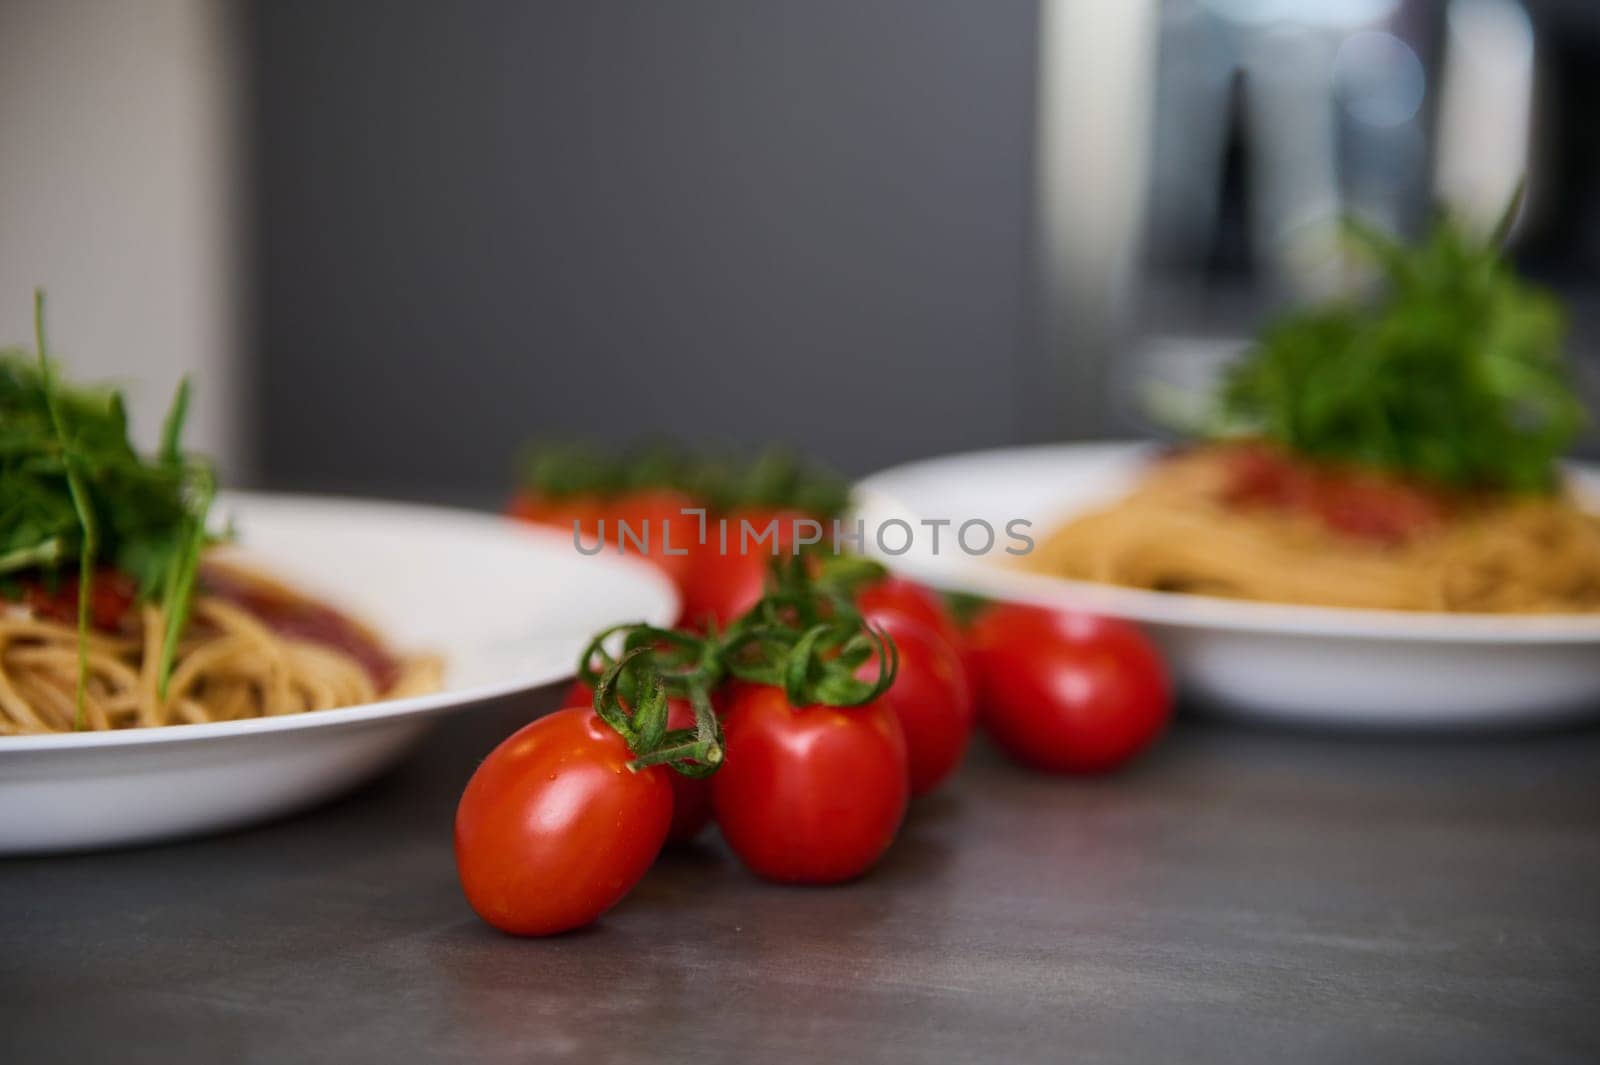 Details on yummy bunch of ripe organic cherry tomatoes, near two white plates with Italian spaghetti pasta garnished with green leaves of arugula, on kitchen table. Food background. Italian cuisine